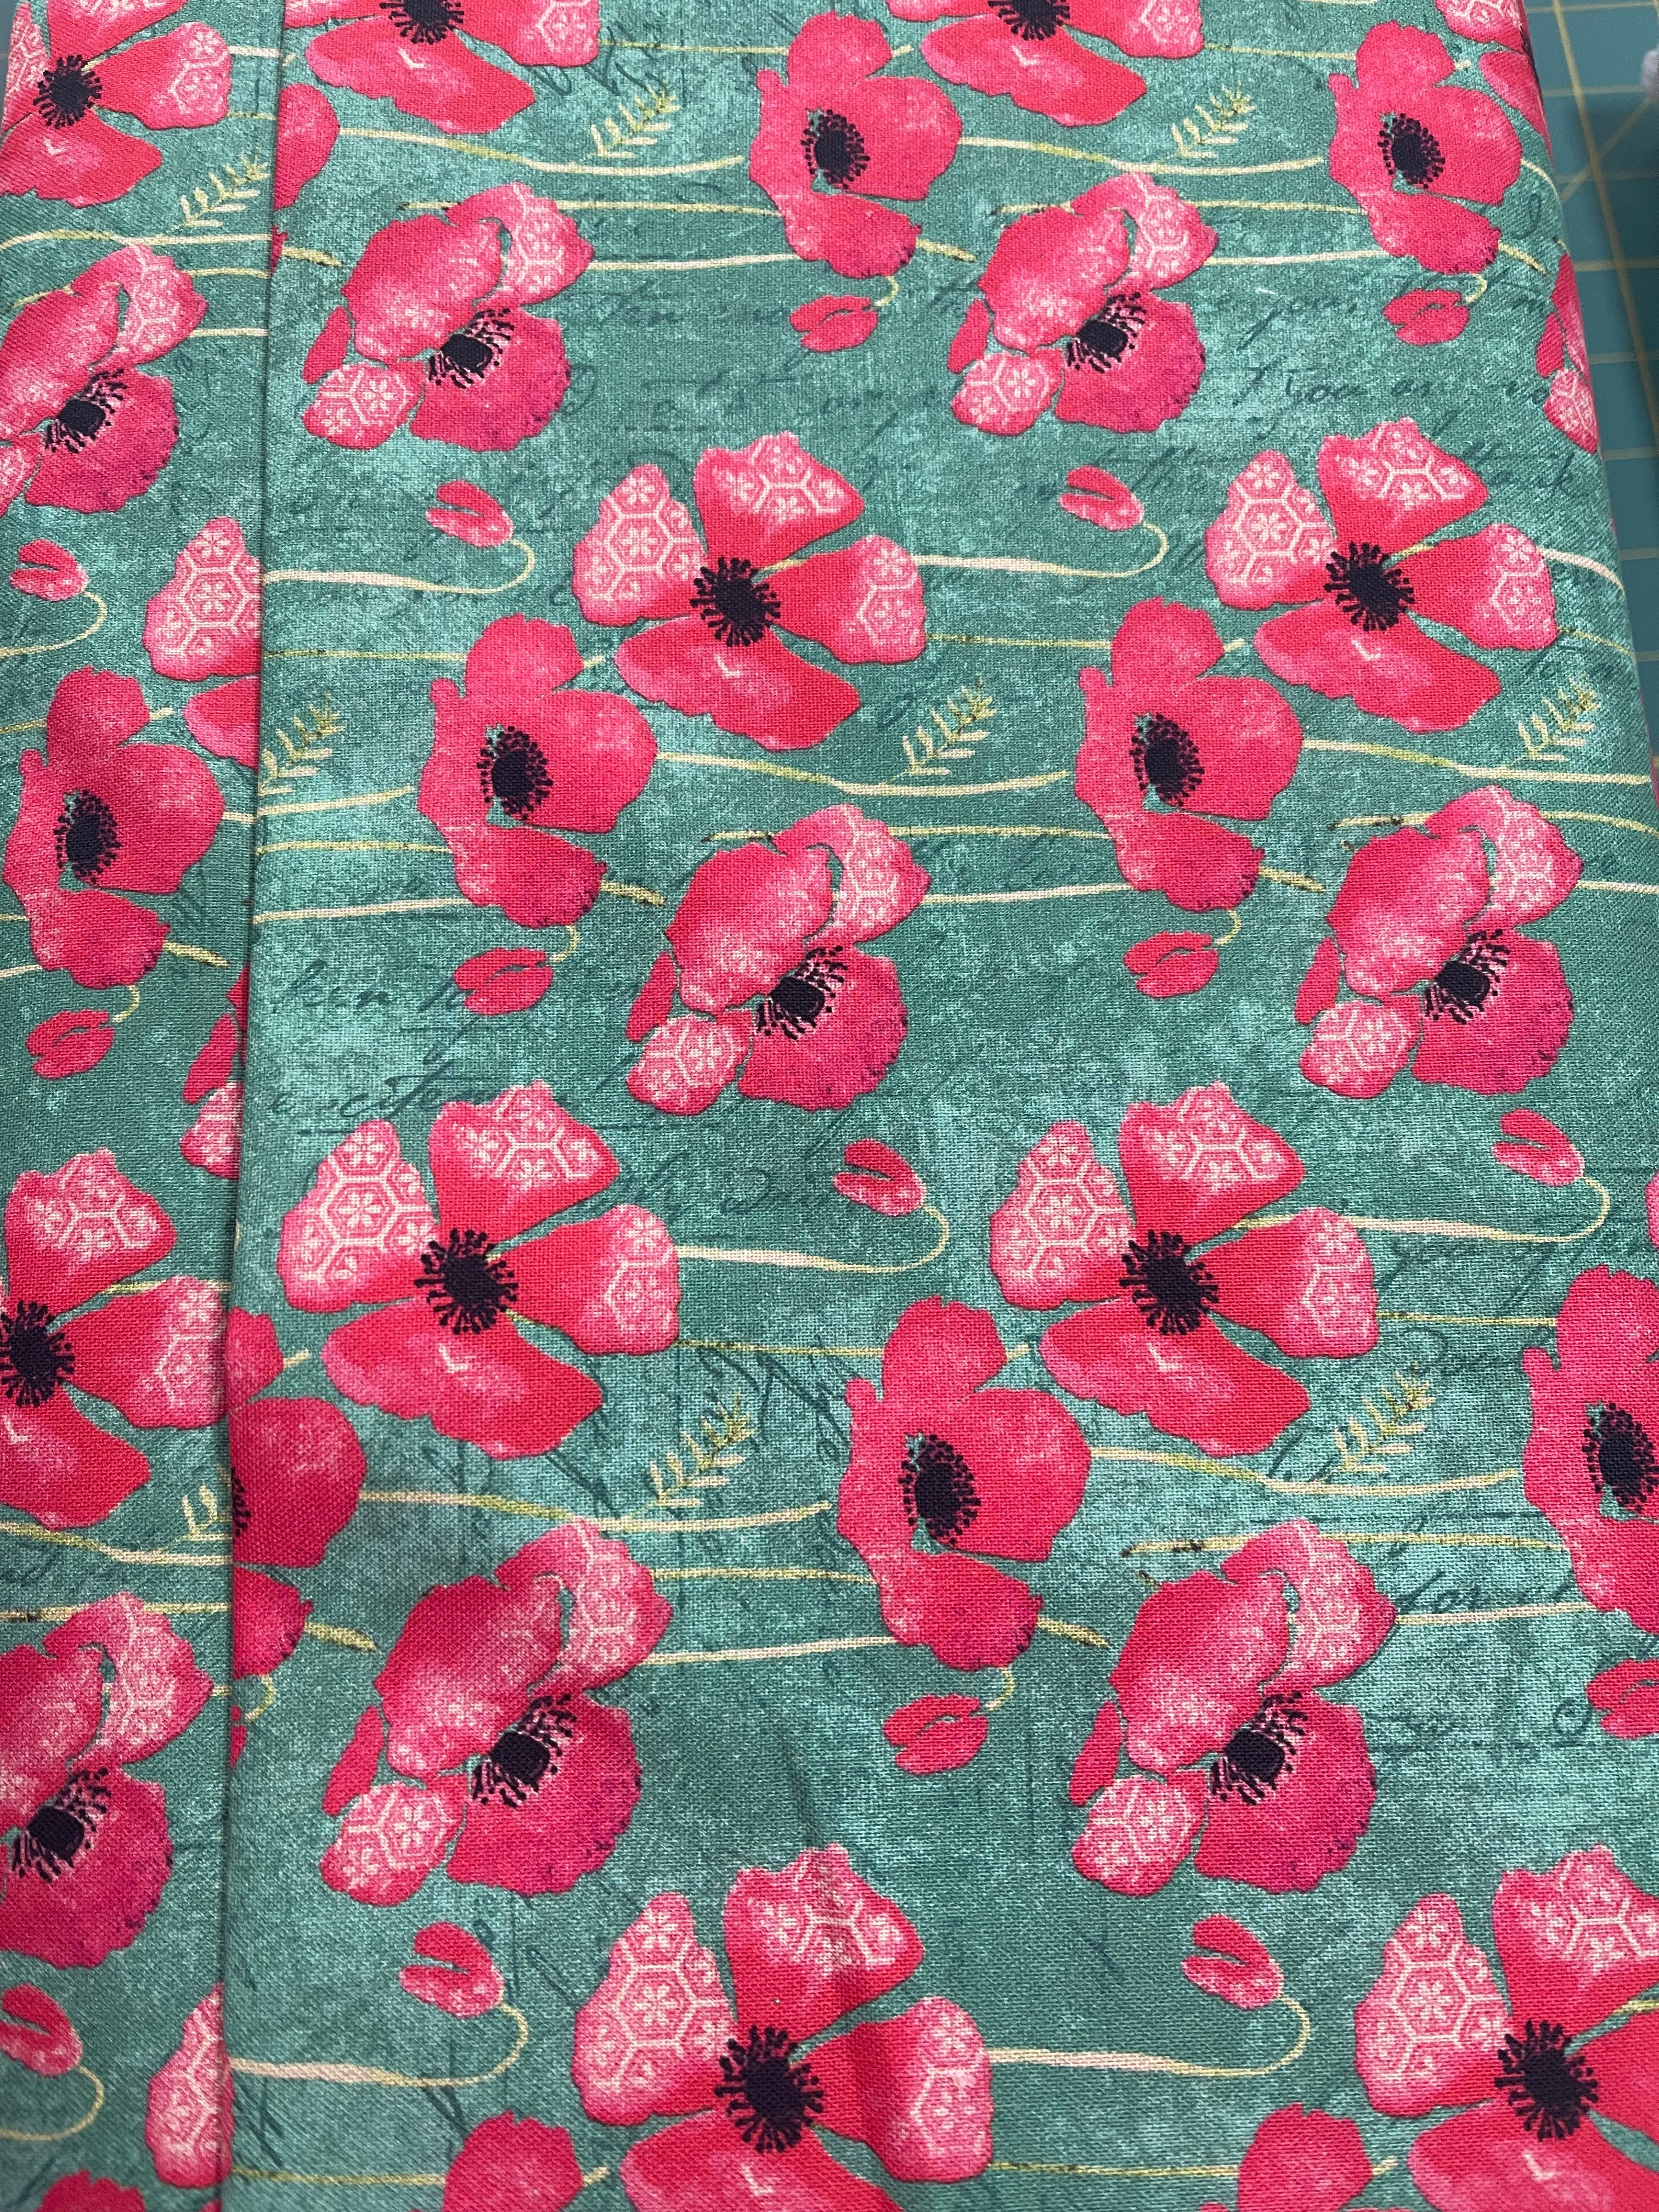 Poppy Teal Poppy 53454-3 by Chistina Adolph Collection for Windham Fabrics Sold by the Half Yard